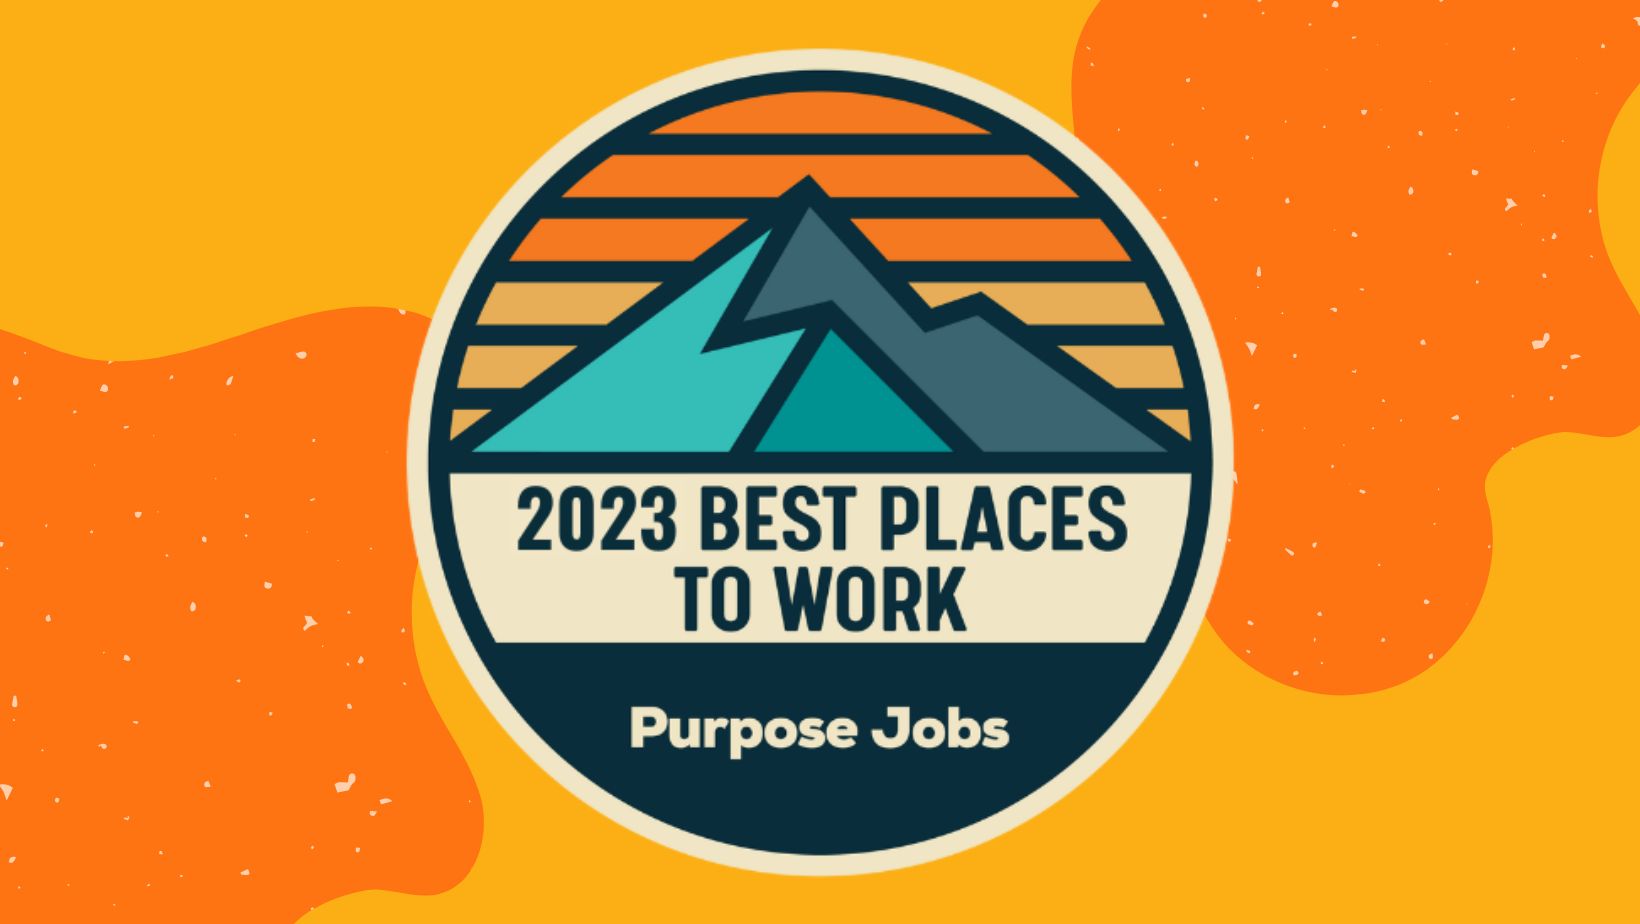 Best Places to Work 2023 Midwest Startups & Tech Purpose Jobs